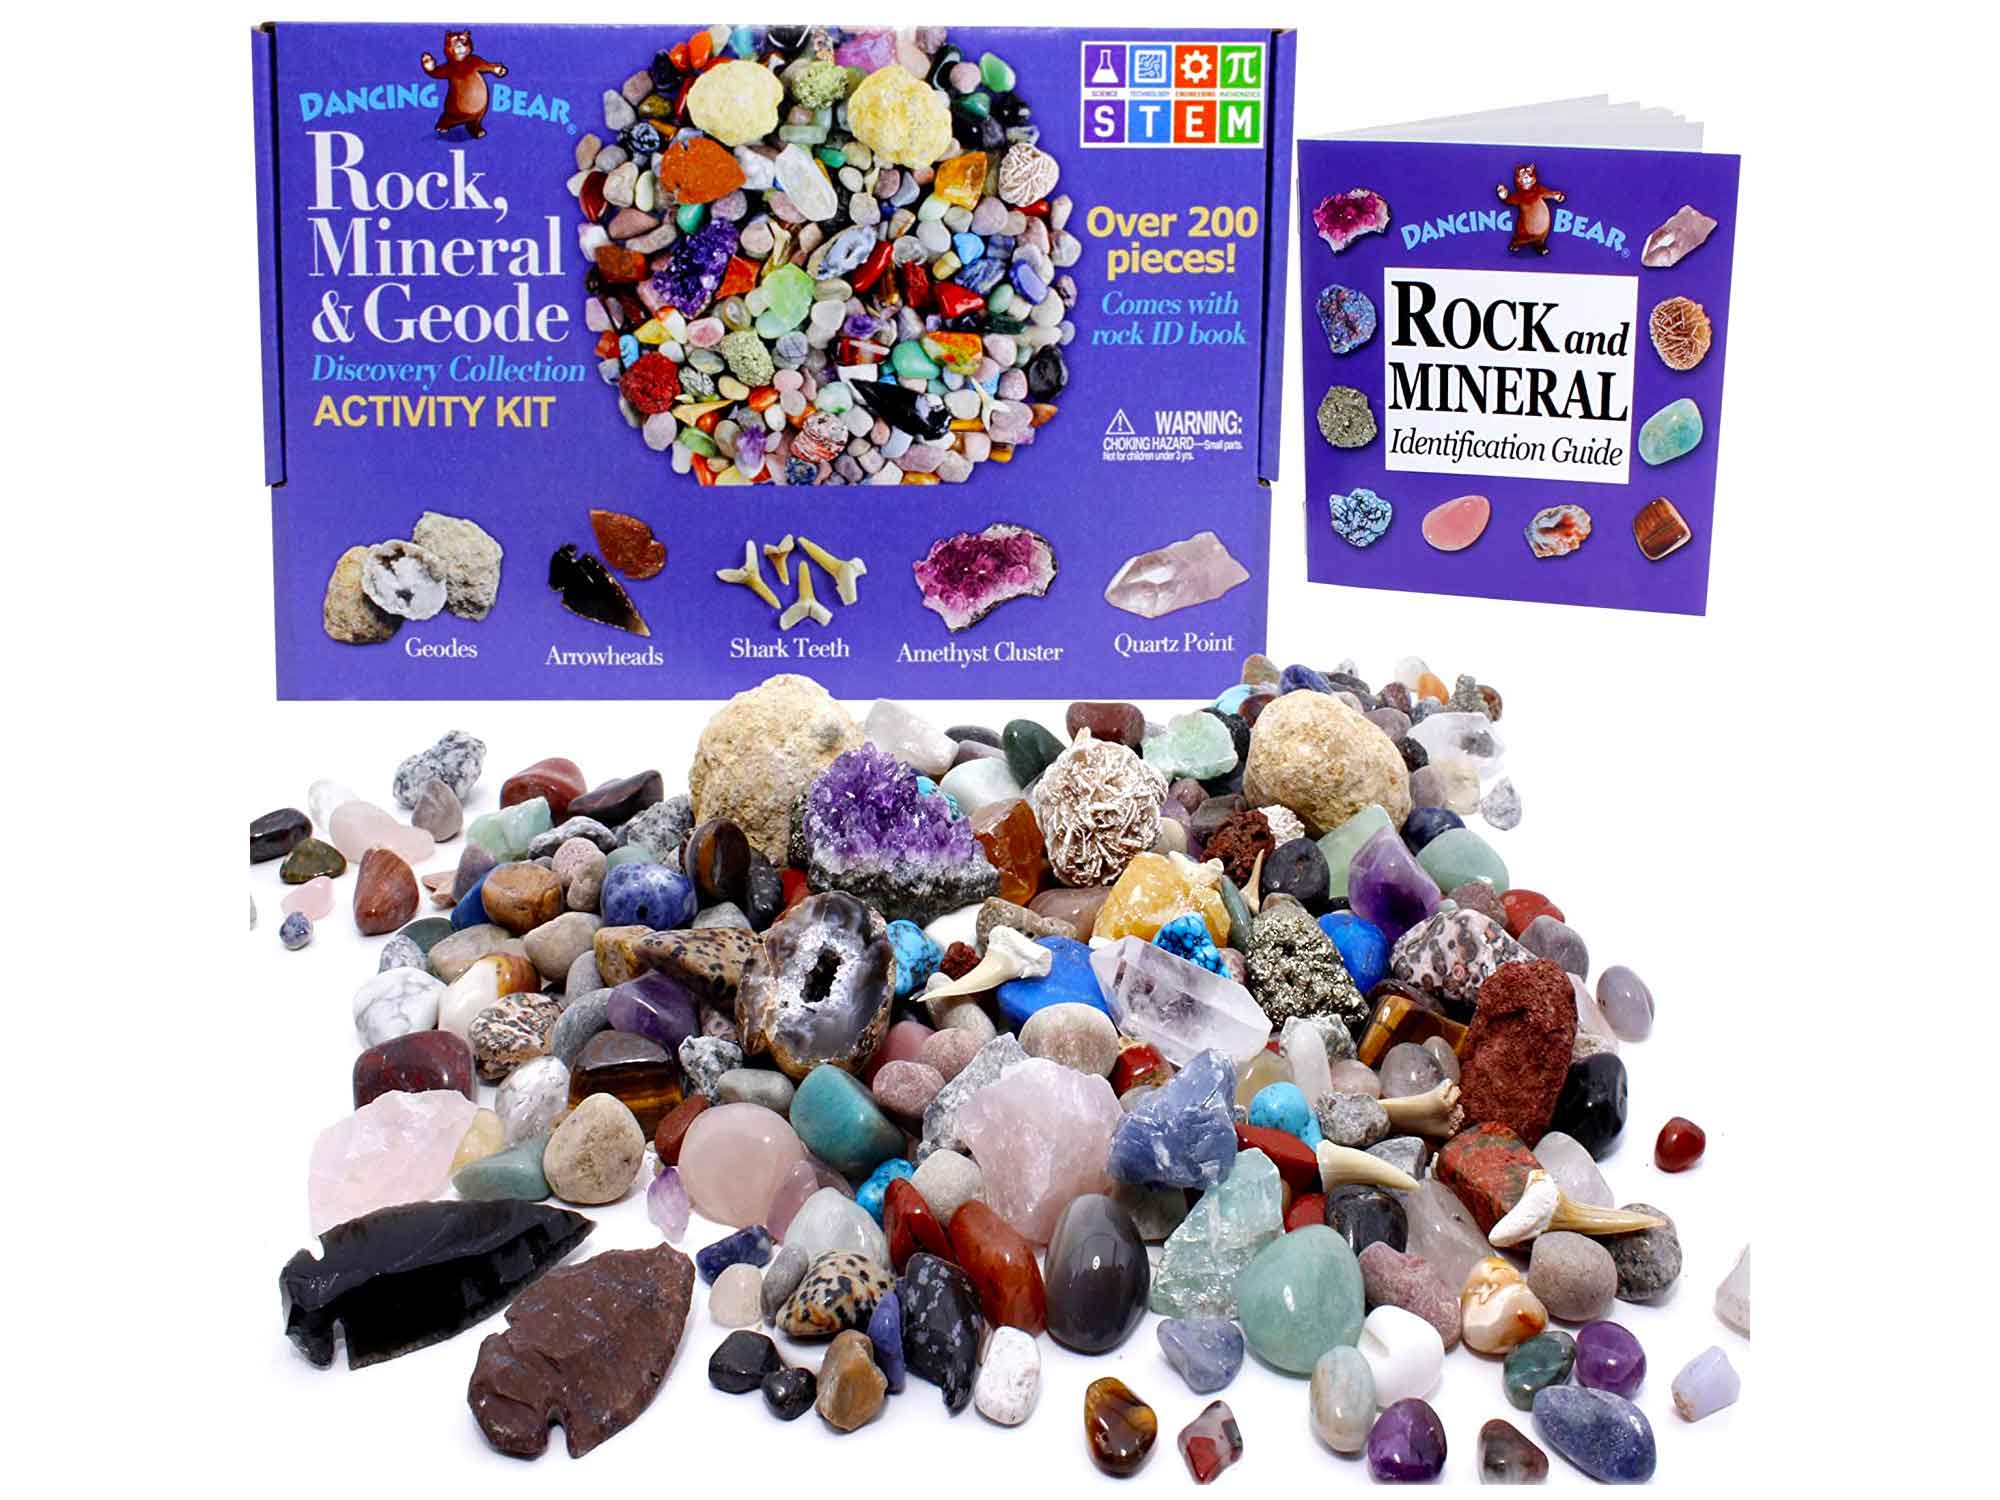 Dancing Bear Rock & Mineral Collection Activity Kit (200+Pcs) with Geodes, Shark Teeth Fossils, Arrowheads, Crystals, Gemstones for Kids, Rock Book, Treasure Hunt ID Sheet, STEM Science Education